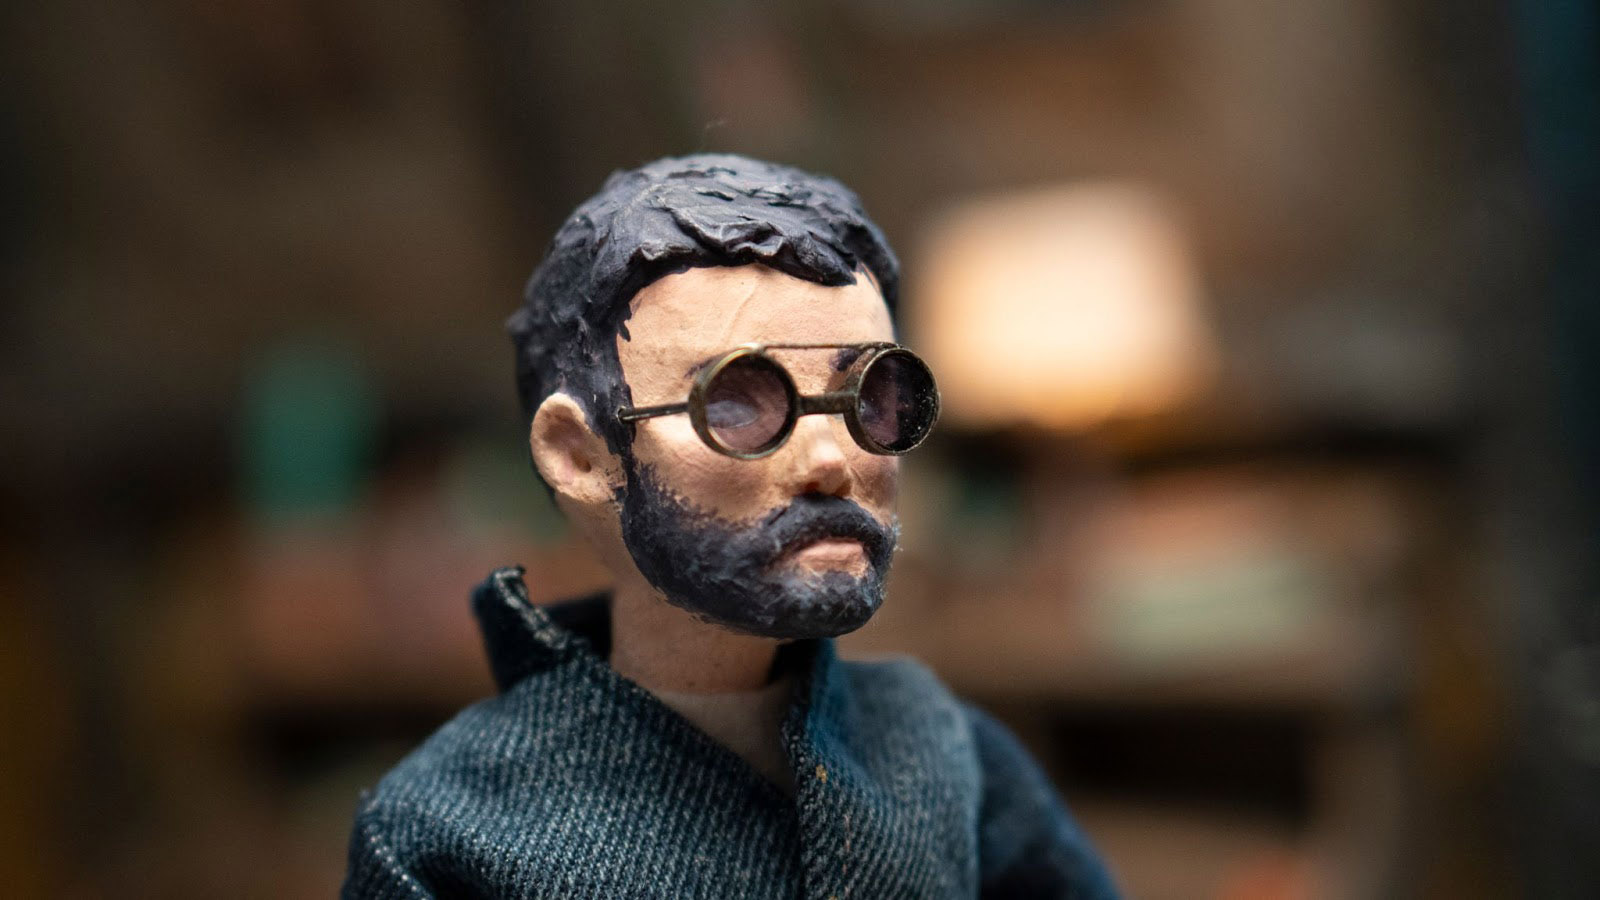 Eels share stop-motion animated music video for 'Earth To Dora' 